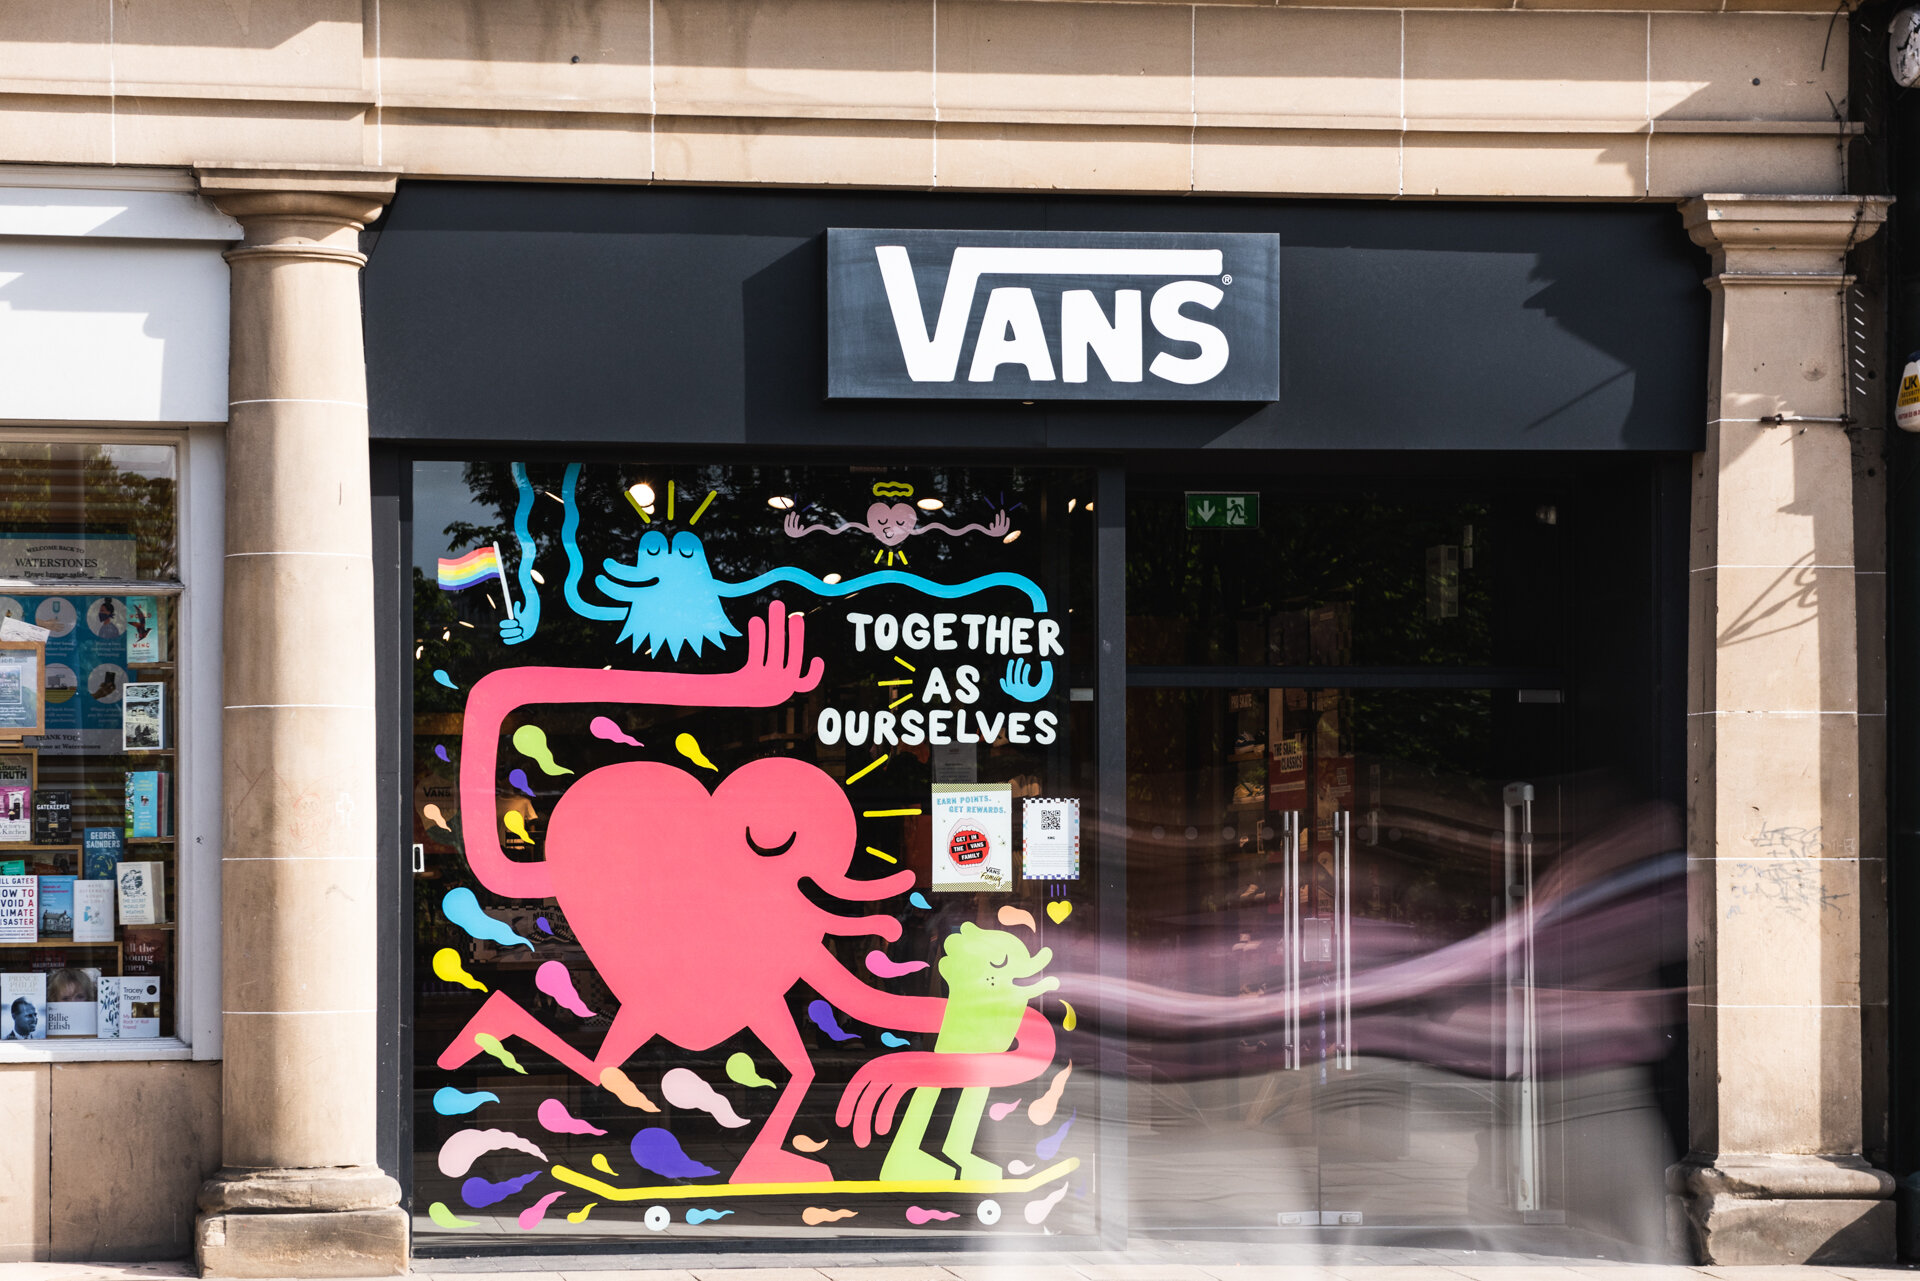 Vans Ourselves —